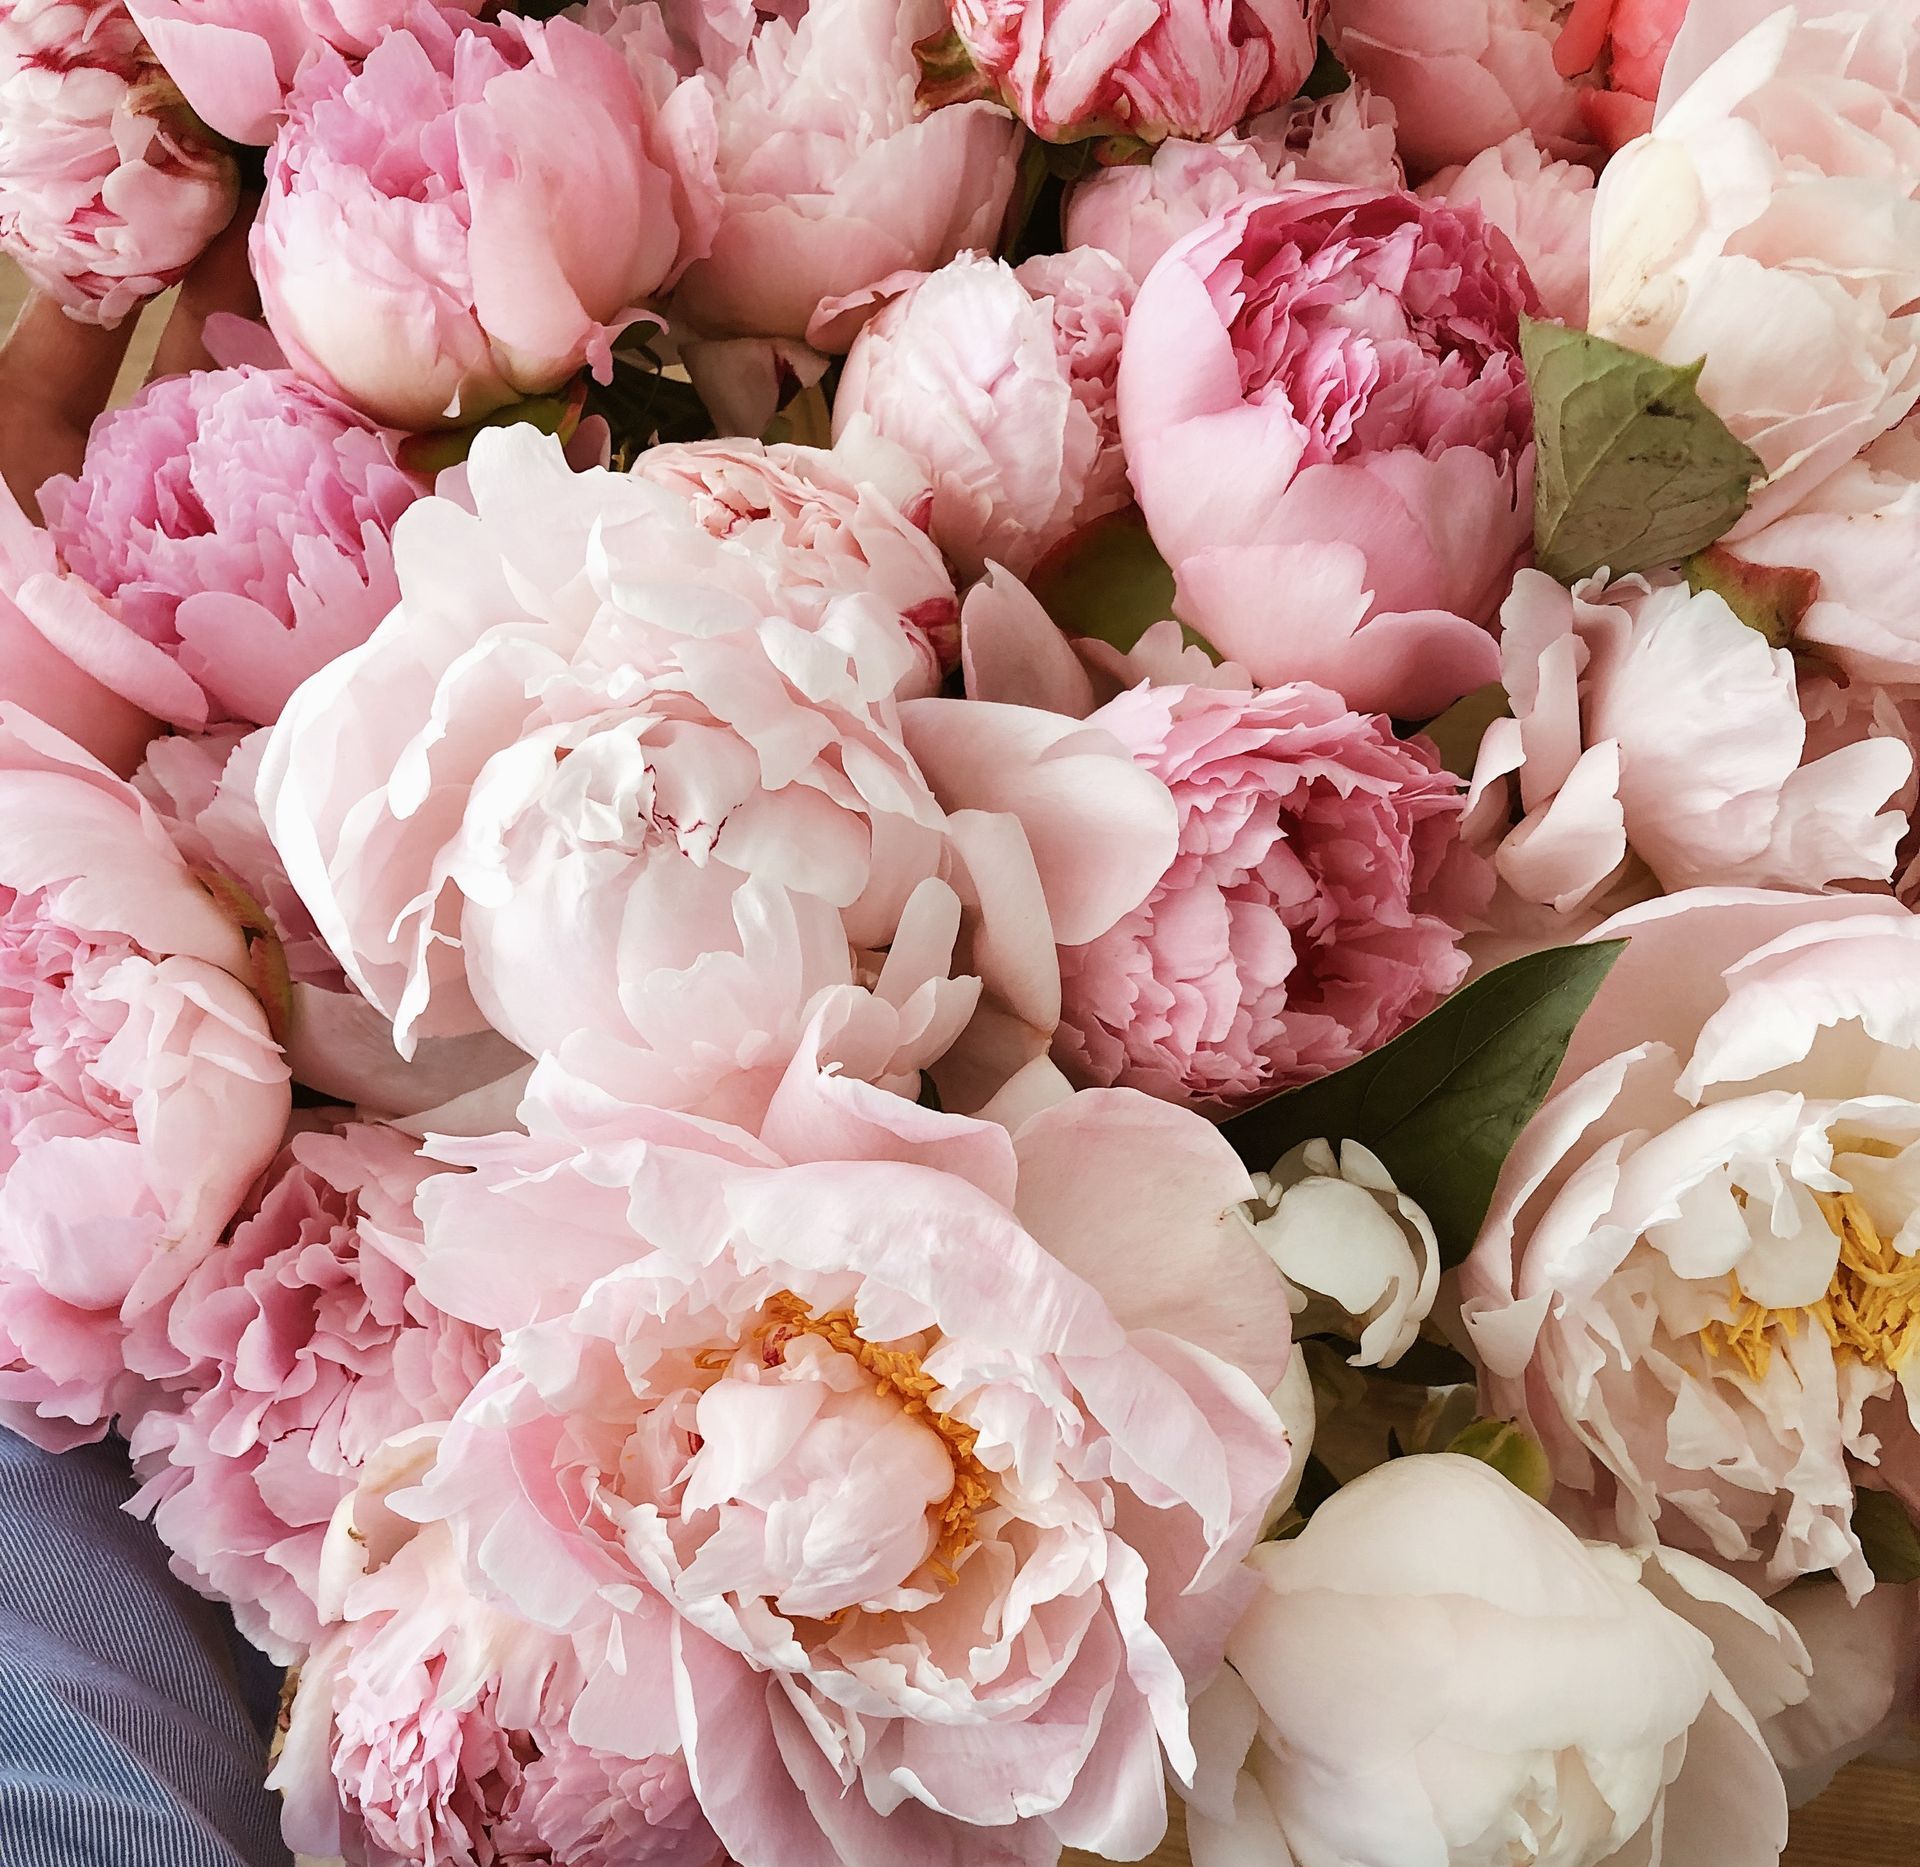 Pastel pink peonies, roses, and other wedding flowers